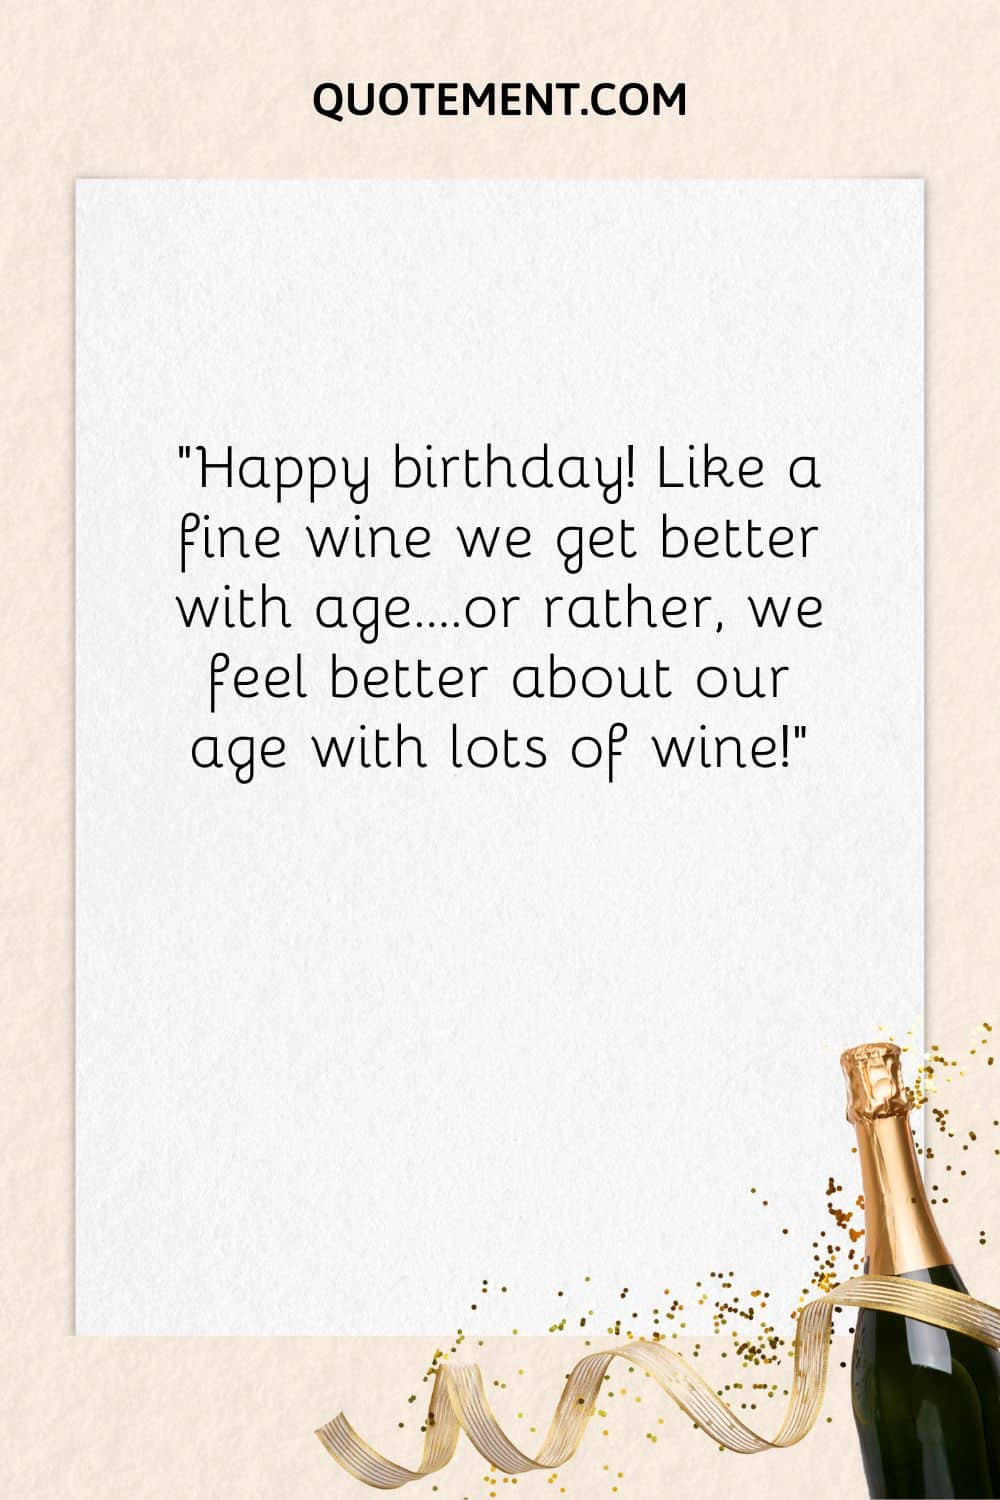 “Happy birthday! Like a fine wine we get better with age….or rather, we feel better about our age with lots of wine!”